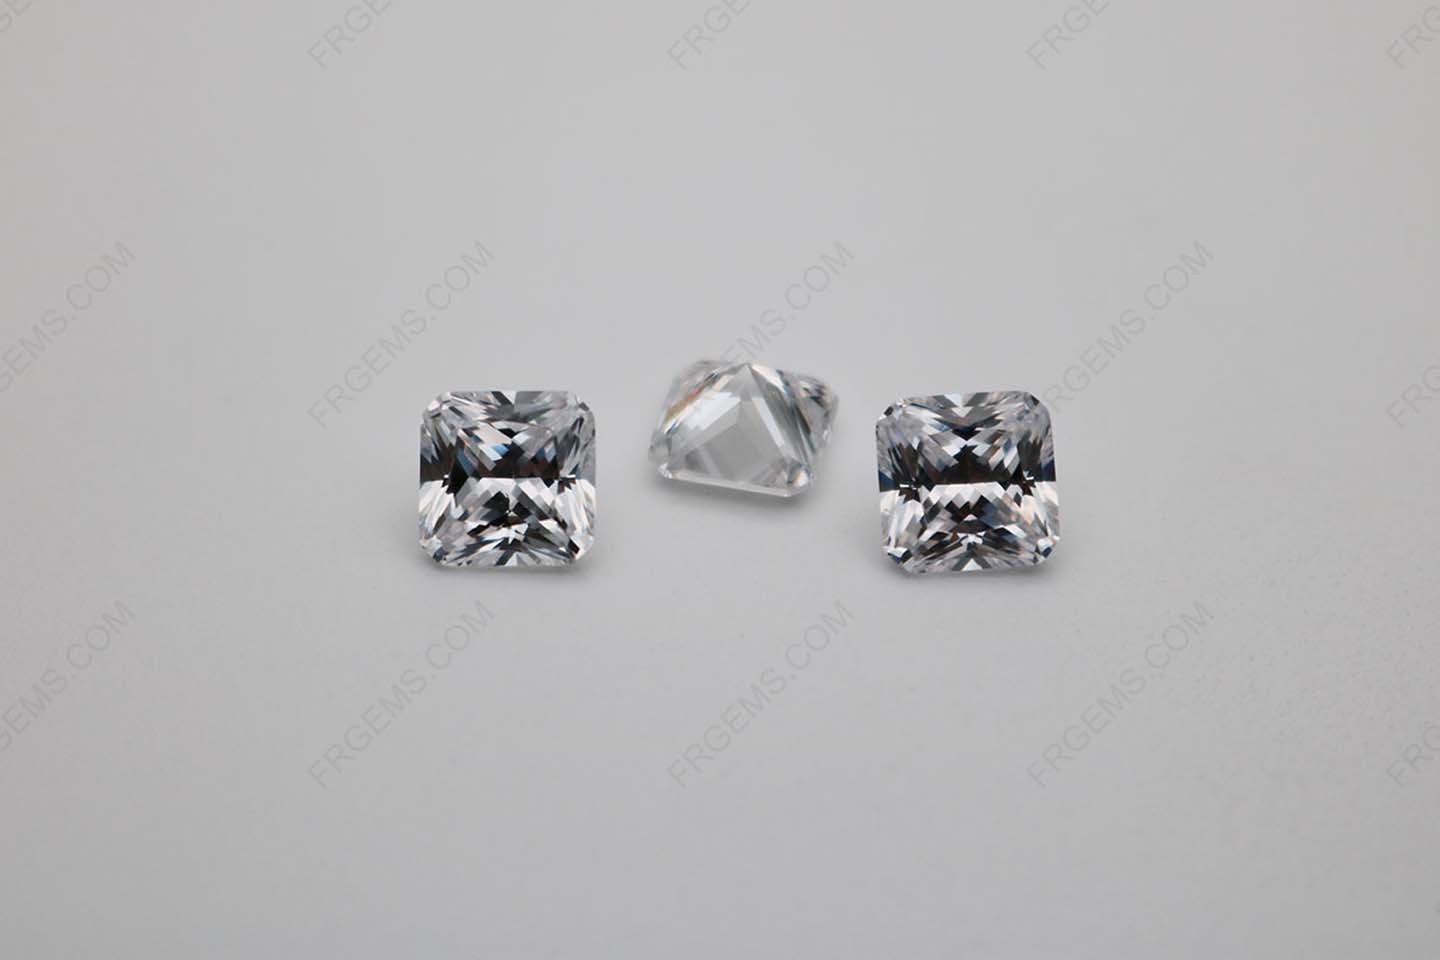 Cubic Zirconia White Color 5A Best Quality Radiant Cut 9x9mm stones CZ01 IMG_1094